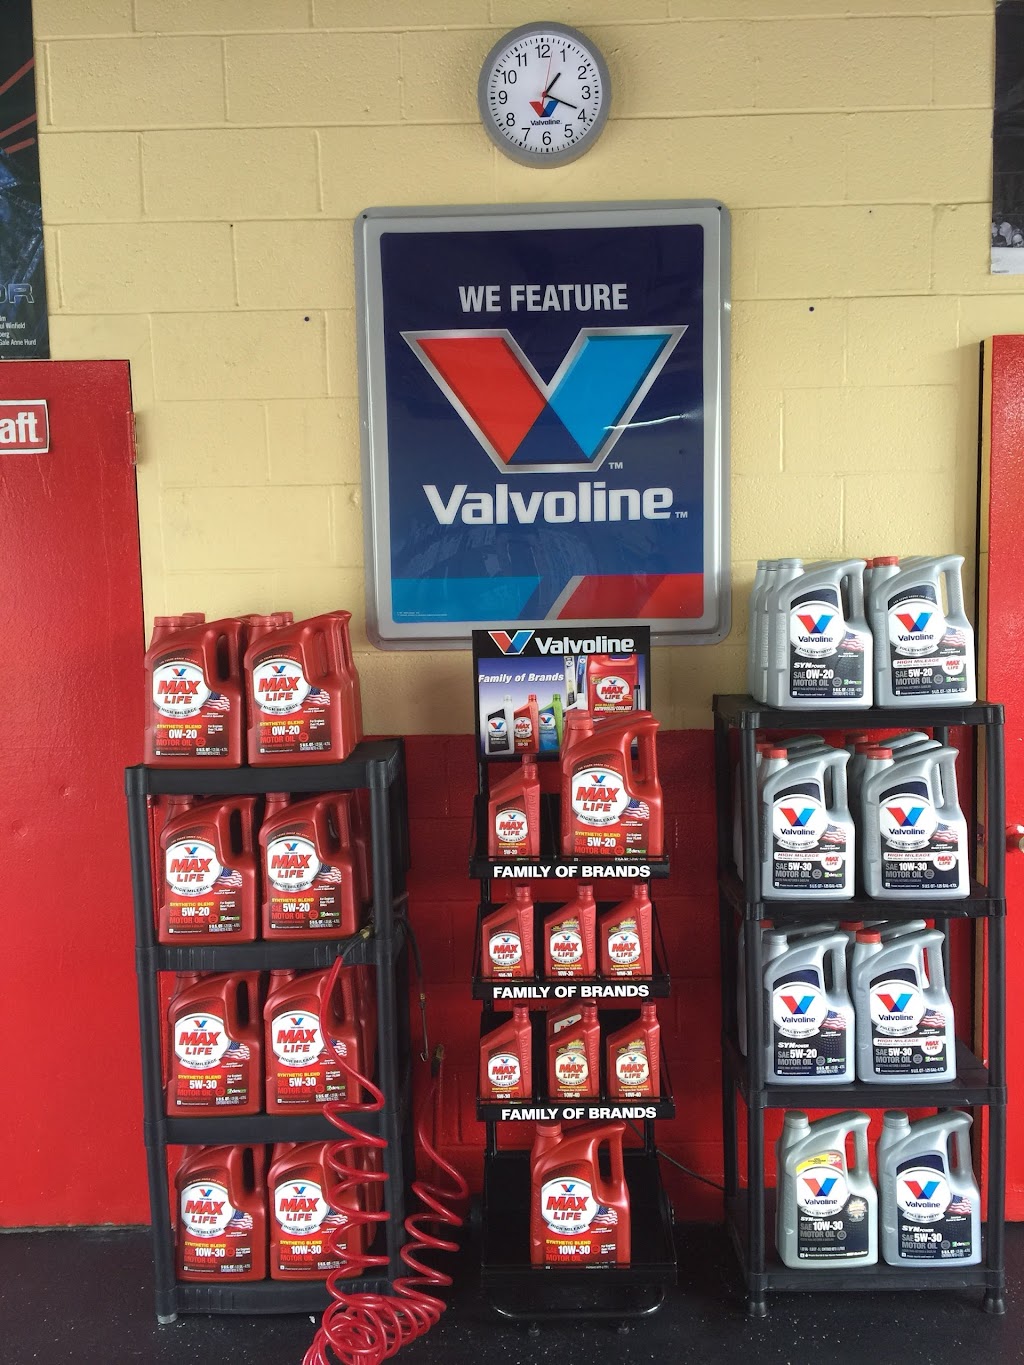 Berrys Oil Exchange - We feature Valvoline | 6988 Cooley Lake Rd #4110, Waterford Twp, MI 48327, USA | Phone: (248) 360-5301